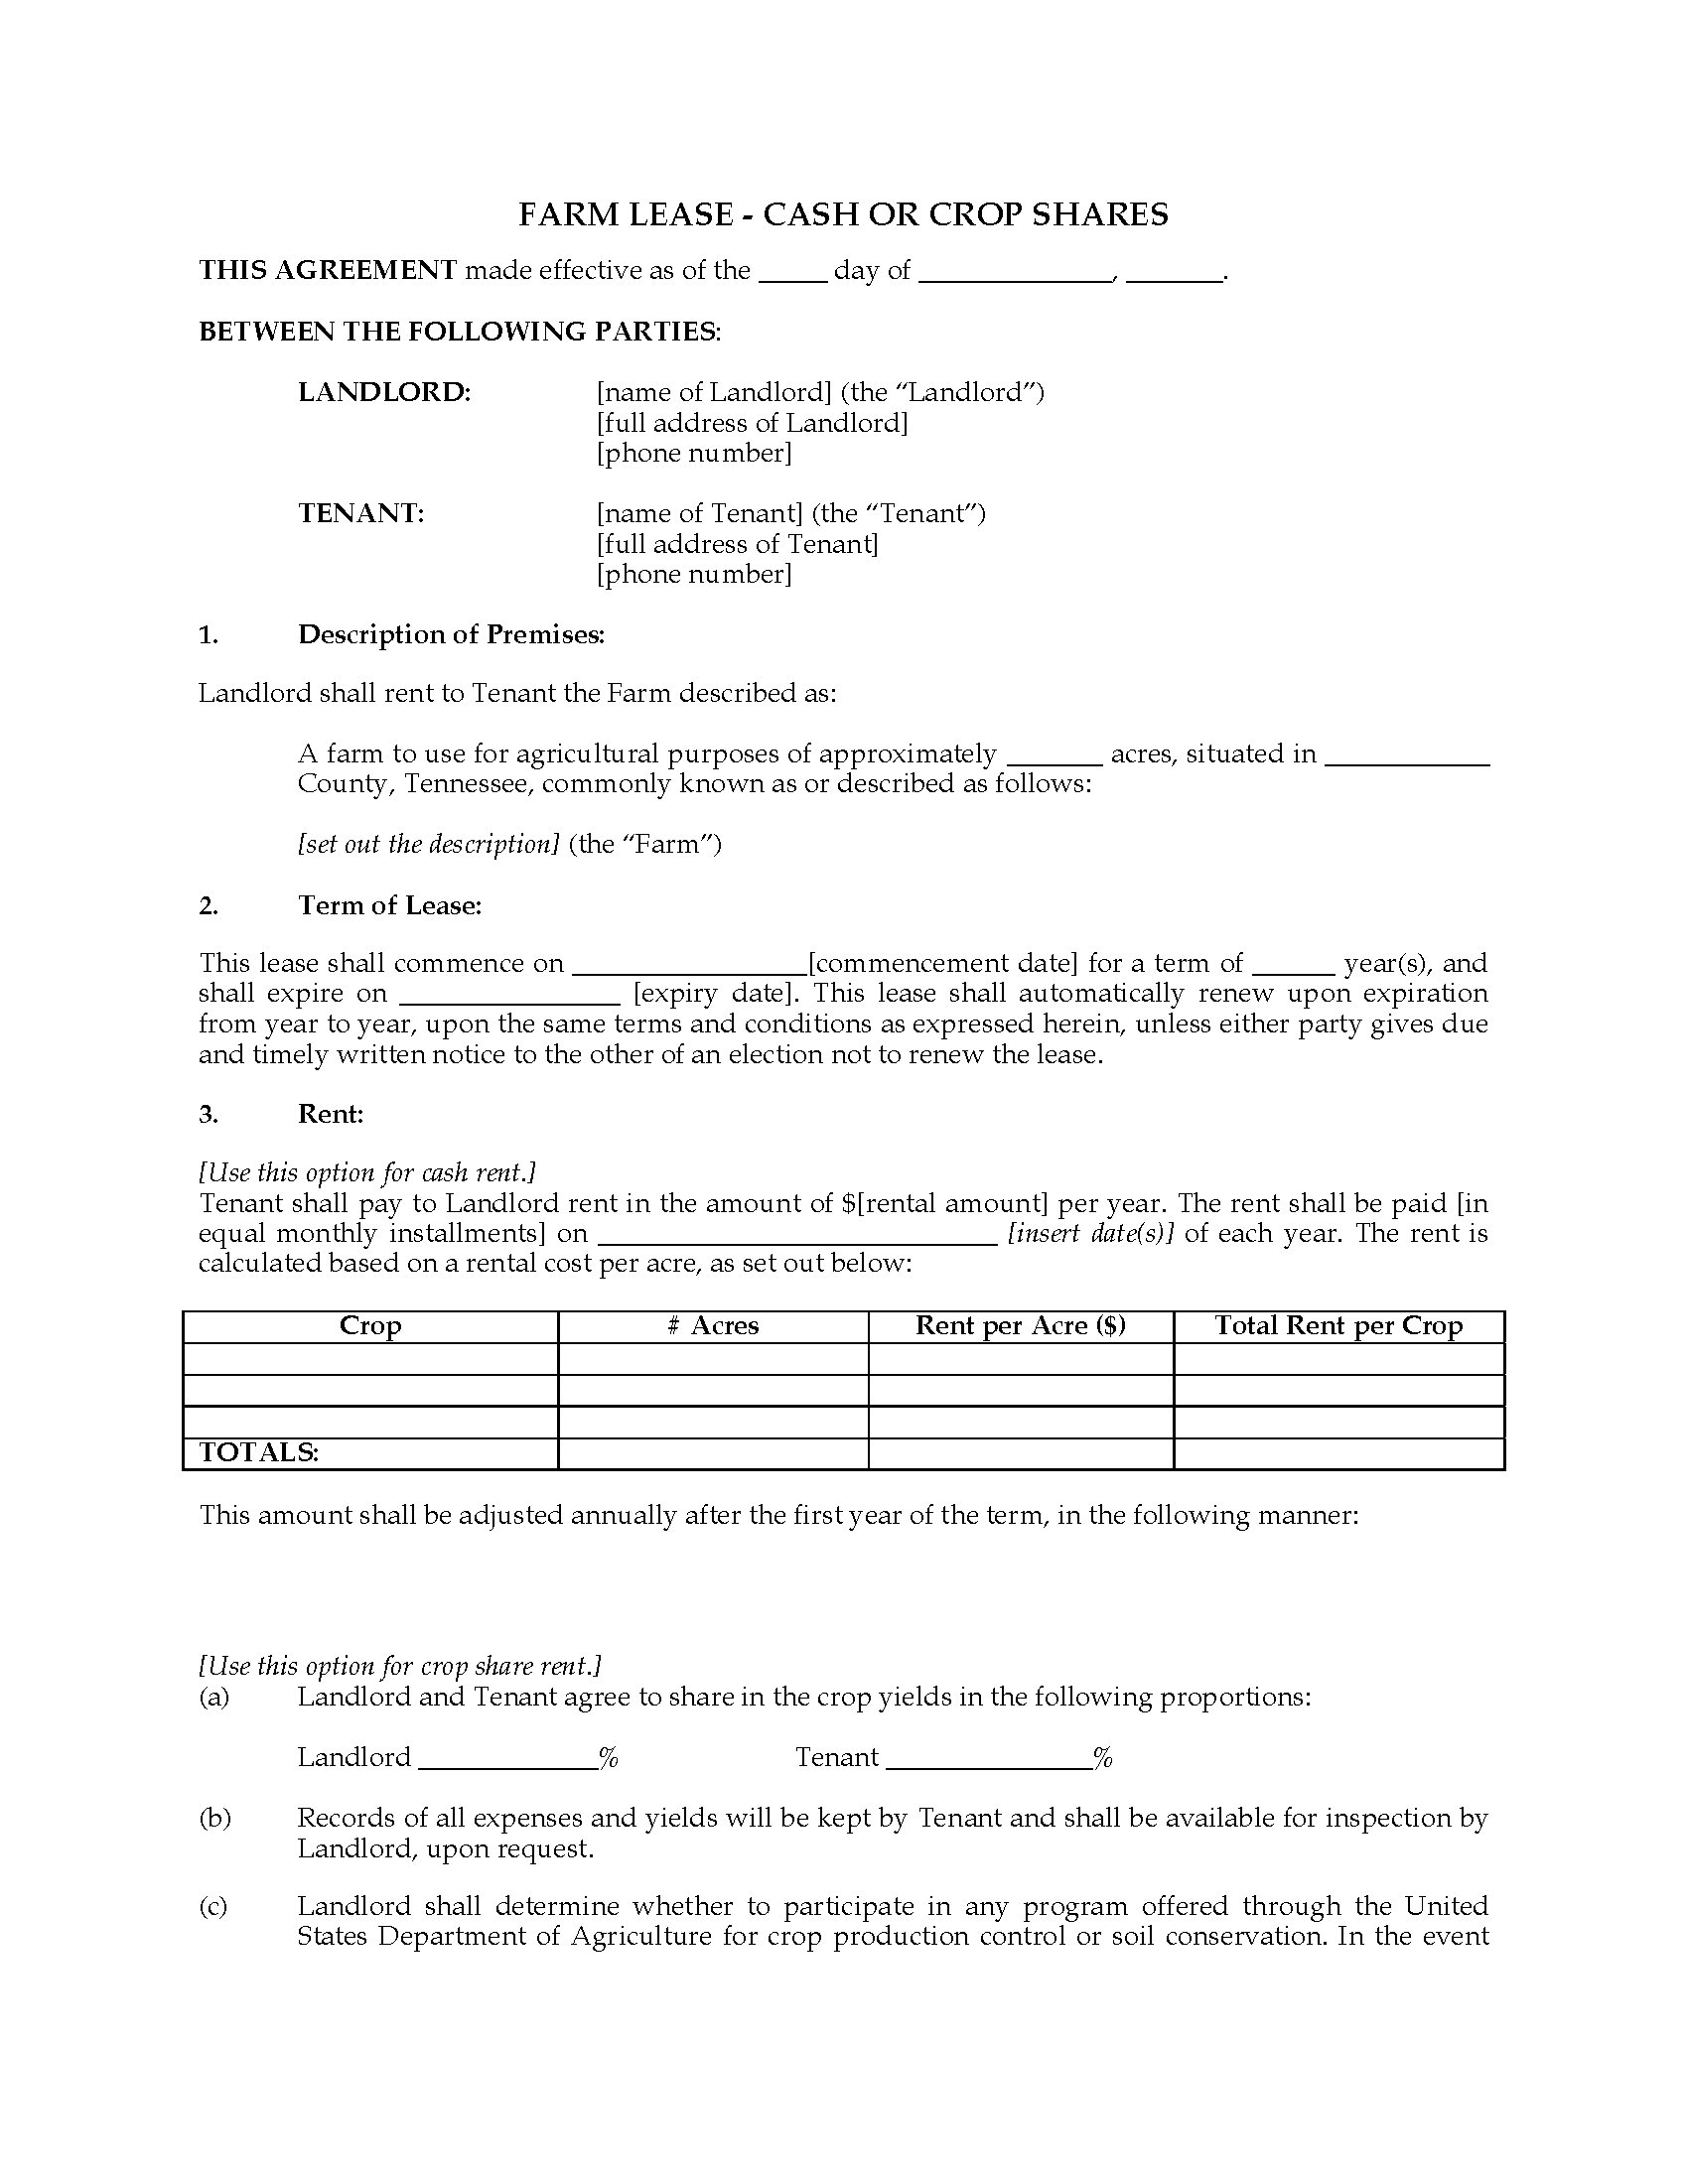 Tennessee Farm Lease for Cash or Crop Shares Legal Forms and Business